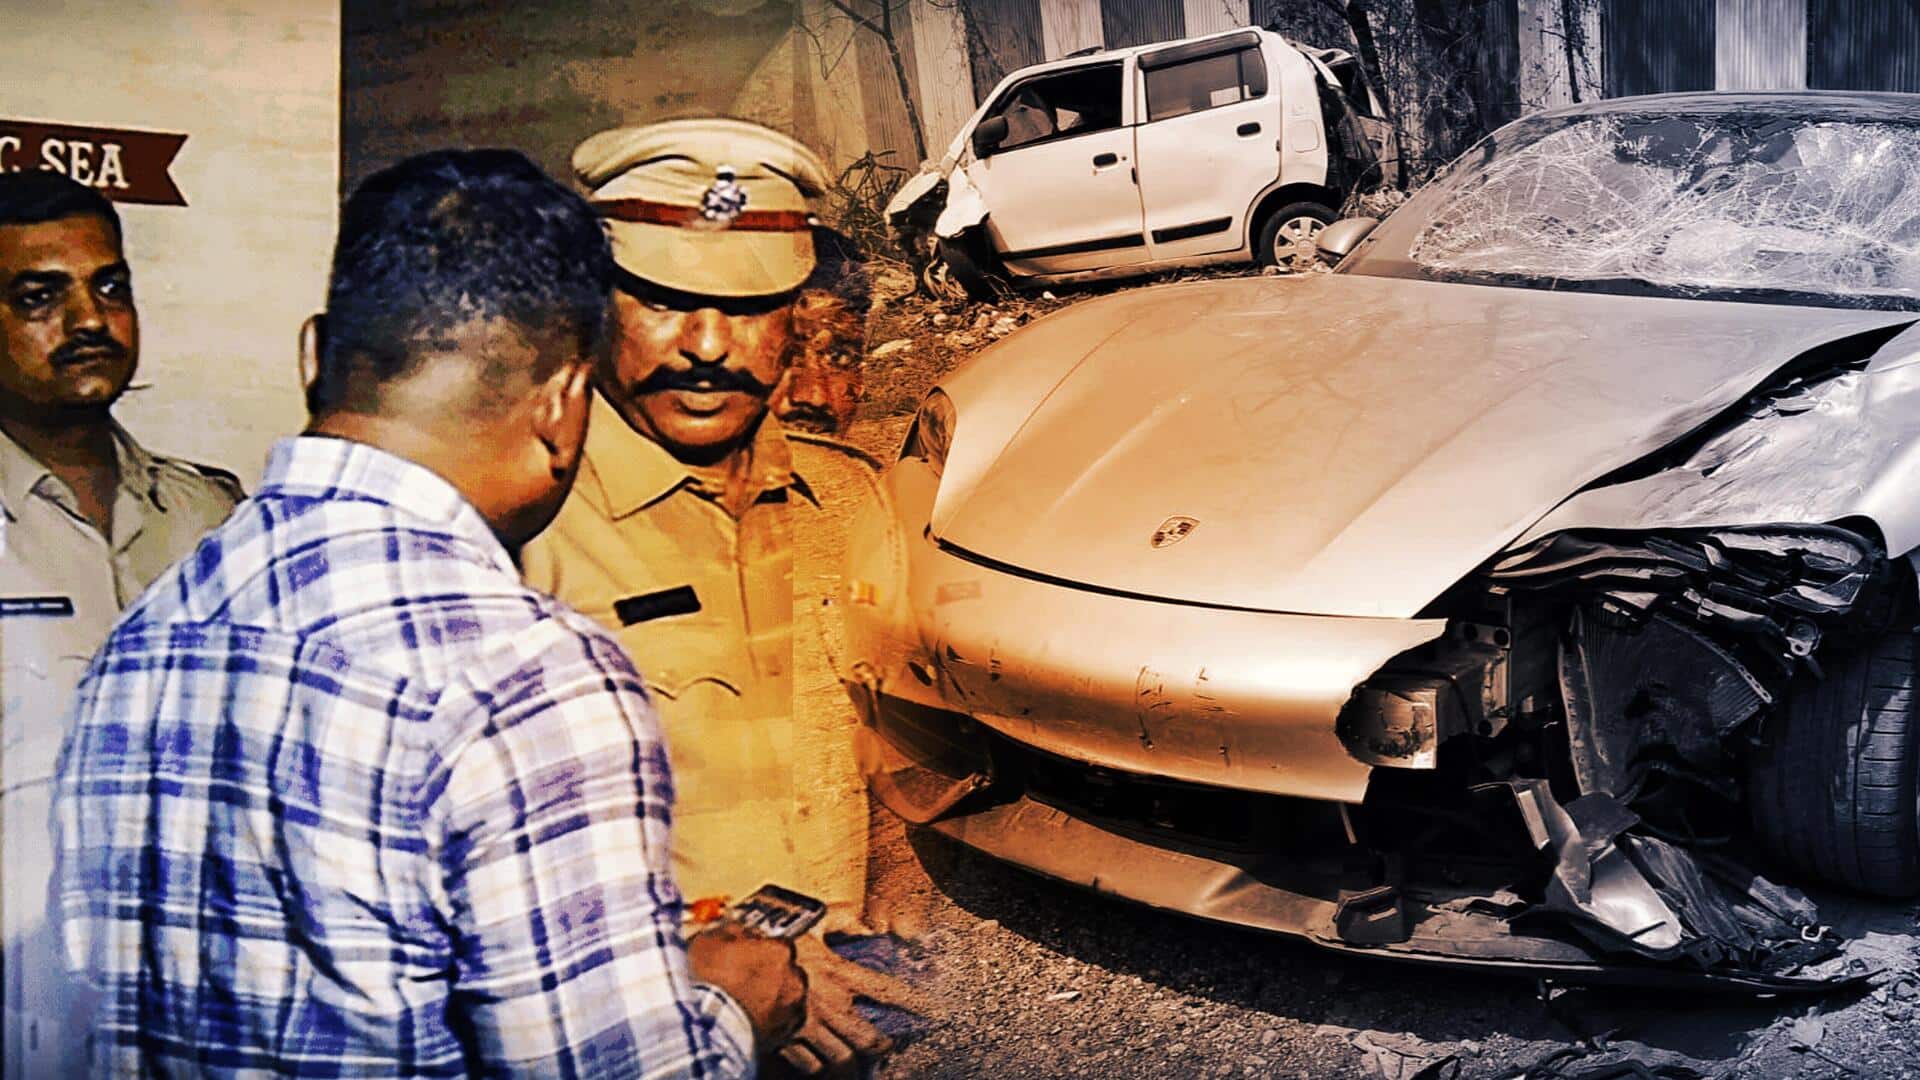 Porsche accident: Teen spent ₹48,000 at first pub, says police